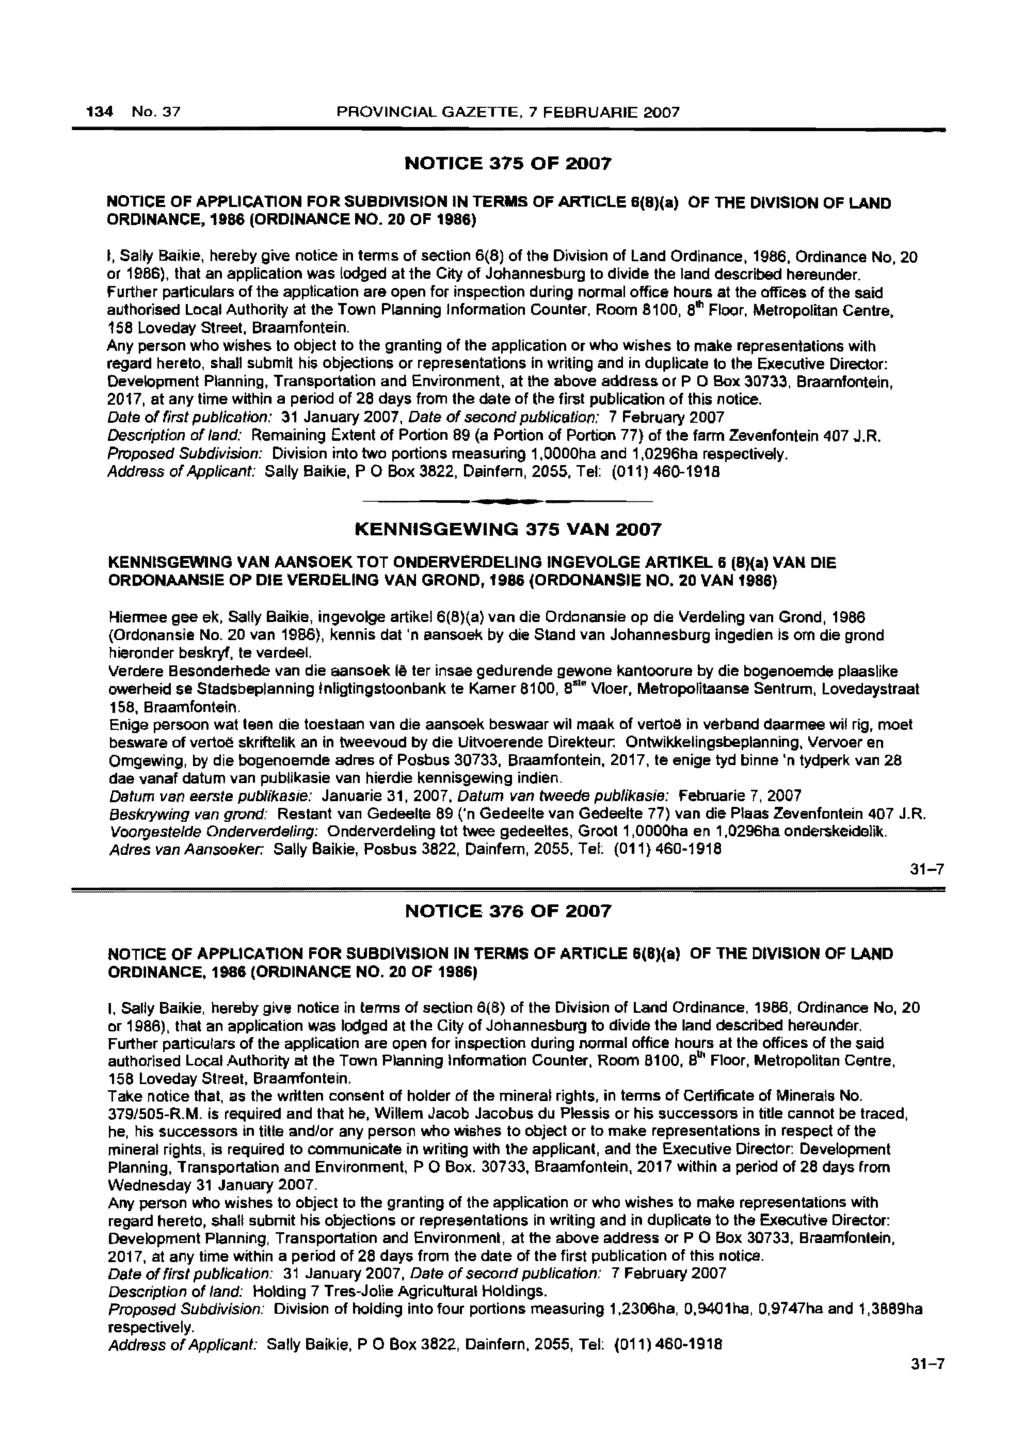 134 No.37 PROVINCIAL GAZETTE, 7 FEBRUARIE 2007 NOTICE 375 OF 2007 NOTICE OF APPLICATION FOR SUBDIVISION IN TERMS OF ARTICLE 6(8)(8) OF THE DIVISION OF LAND ORDINANCE, 1986 (ORDINANCE NO.